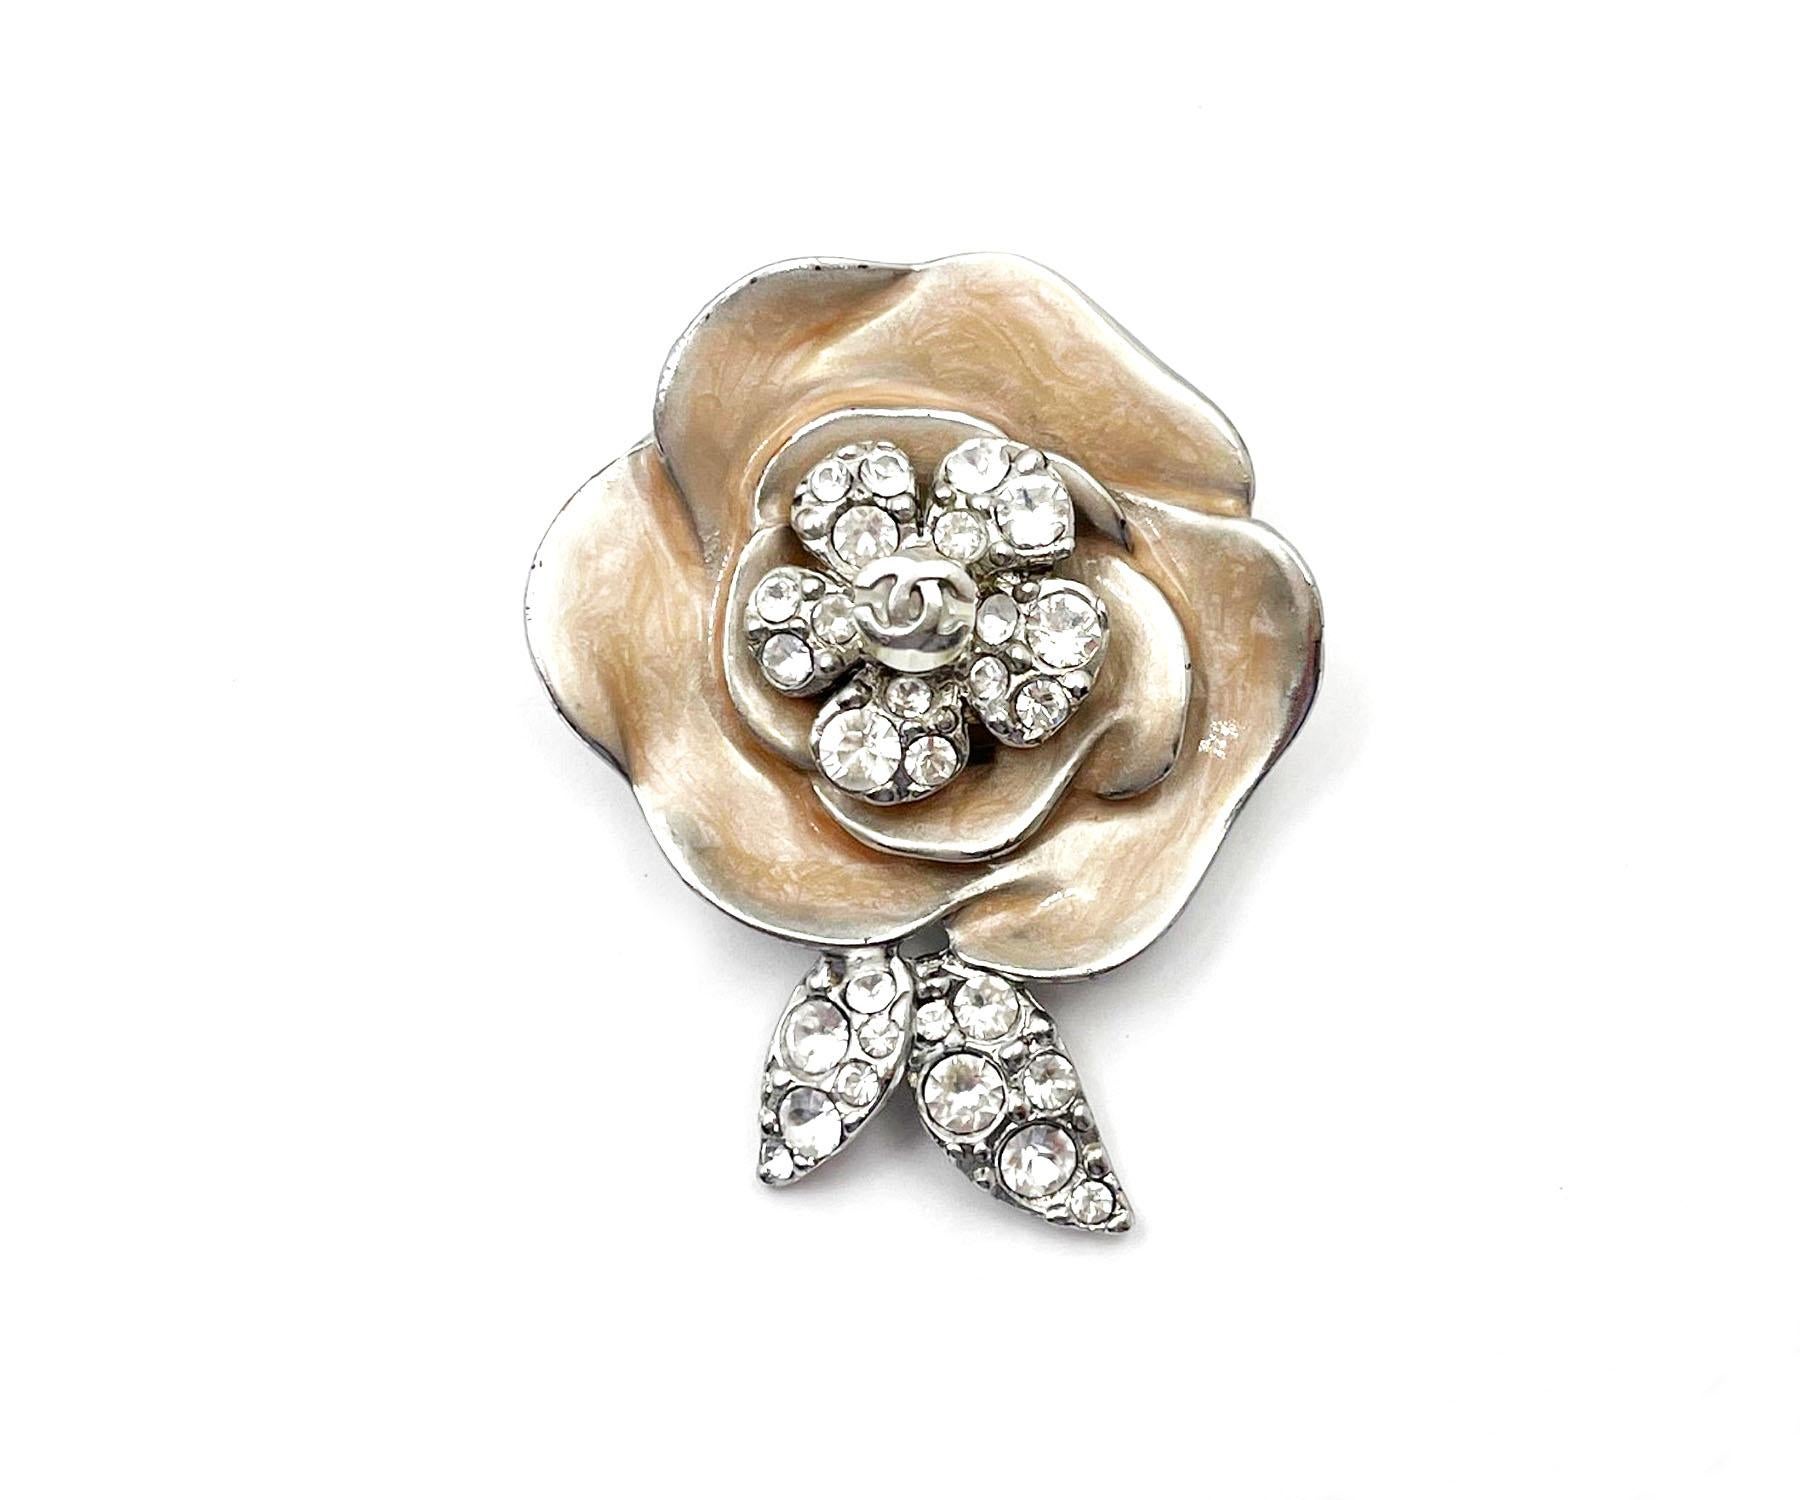 Chanel Silver CC Crystal Pink Enamel Camellia Flower Brooch

*Marked 04
*Made in France
*Comes with the original box

-It is approximately 1.9